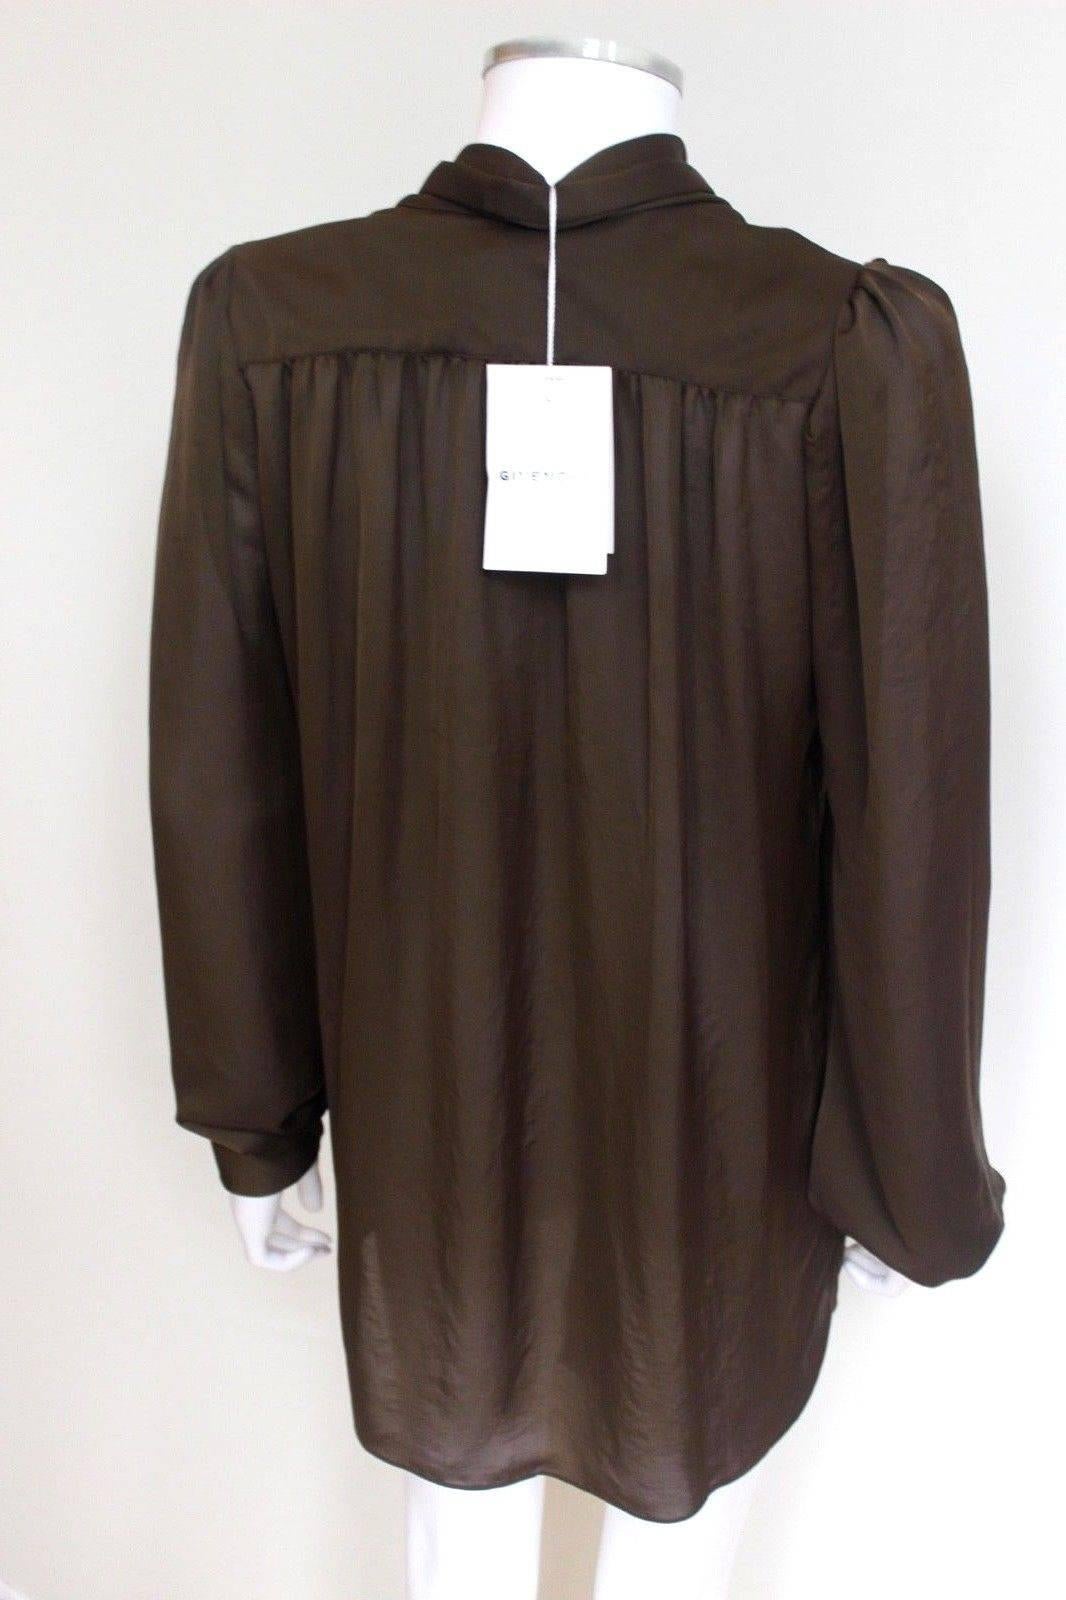 £1500 Givenchy Ruffle Front Blouse F 40 UK 12 
Button front blouse with ruffle panels at front and tie at collar 
buttoned cuffs 
Brown/Olive in colour 
Length 28 inches, chest 21 inches across laid flat. 
Excellent condition, any questions please